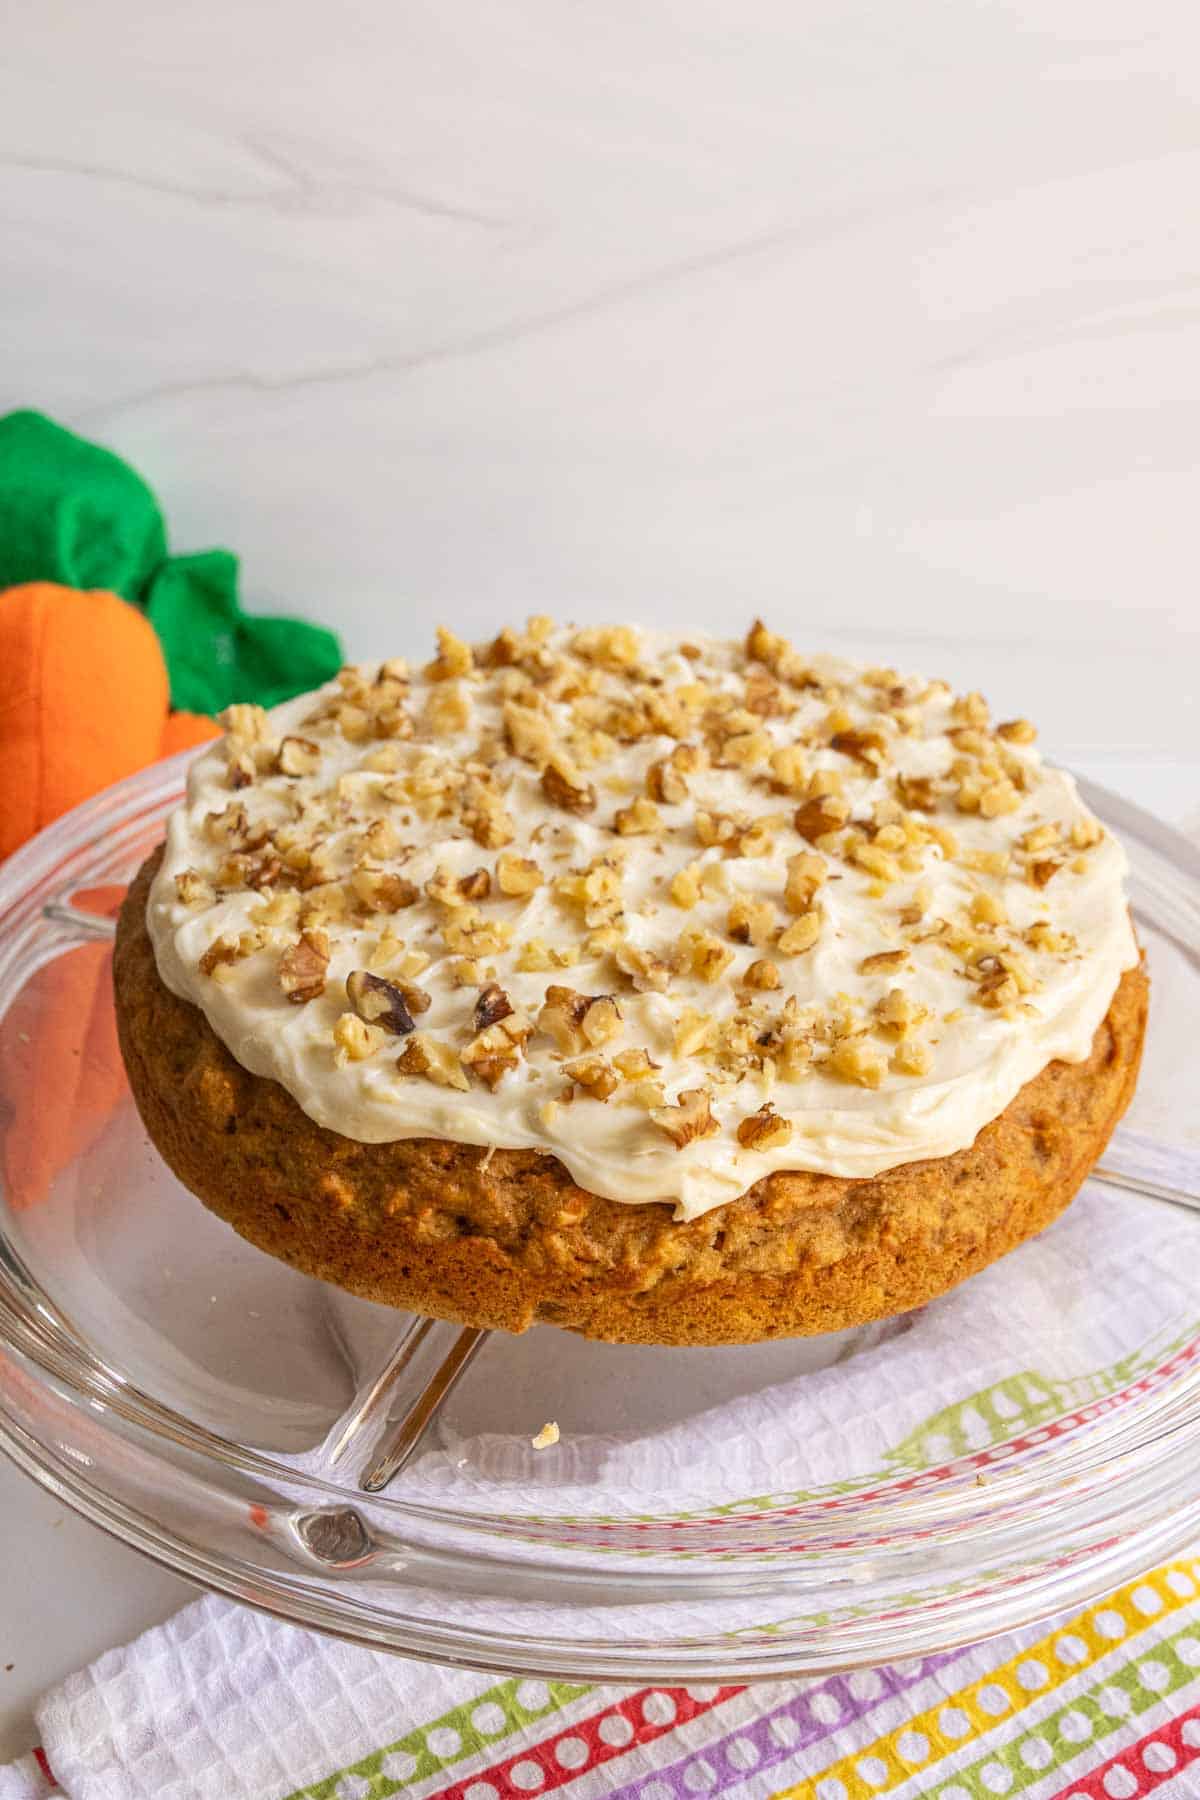 A carrot cake on a glass cake stand.